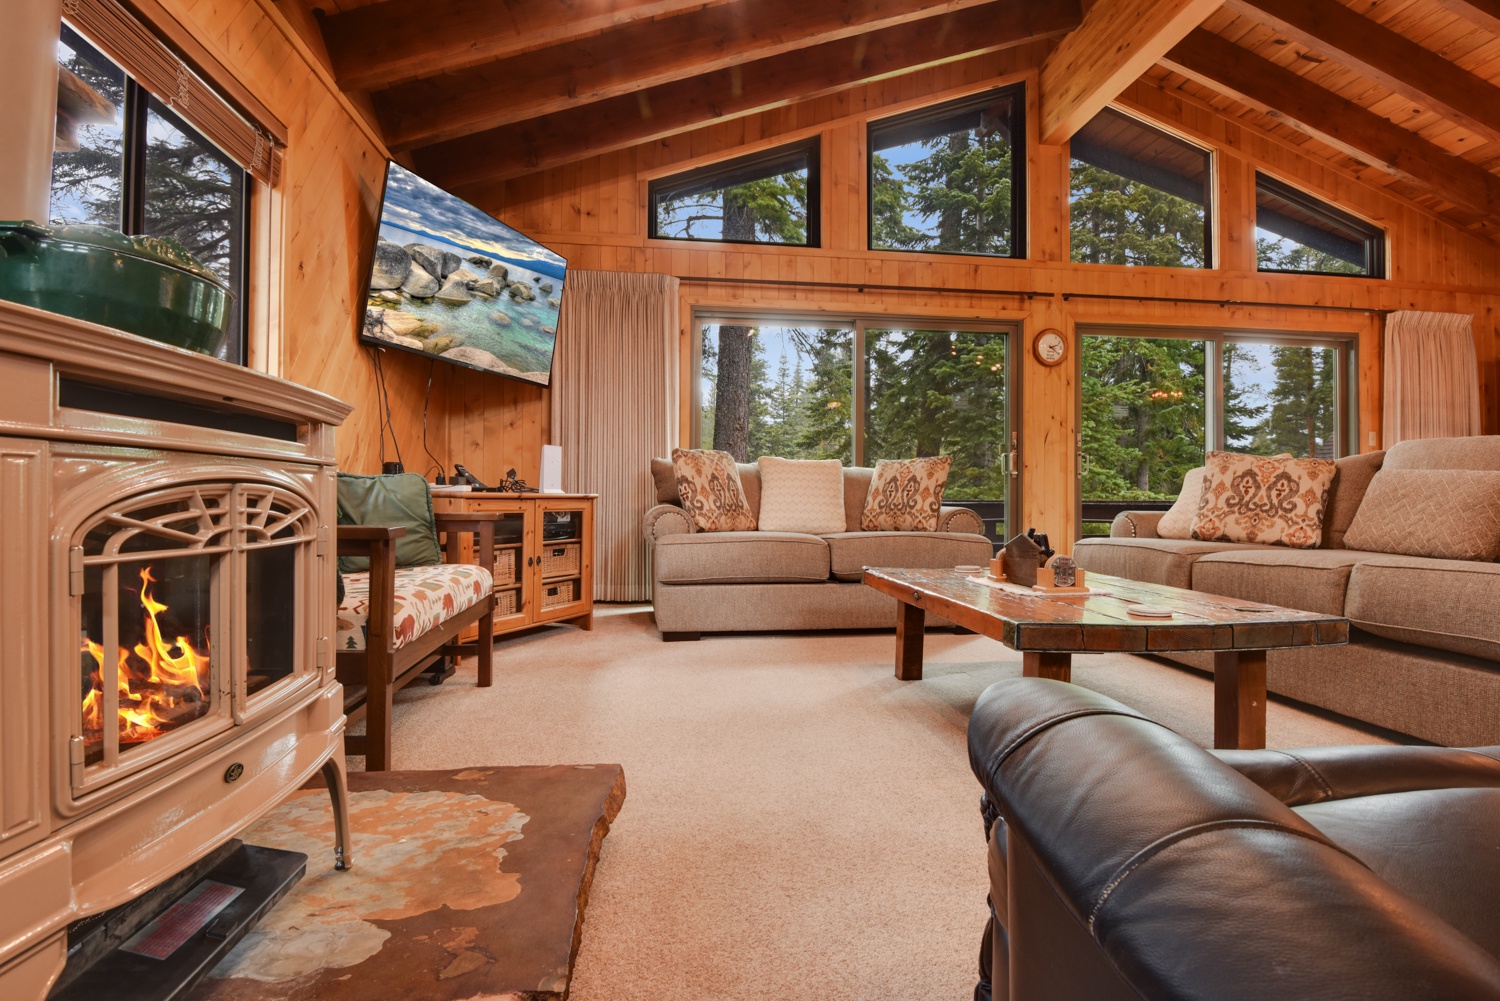 Spacious living space with ample seating, Smart TV, and gas fireplace